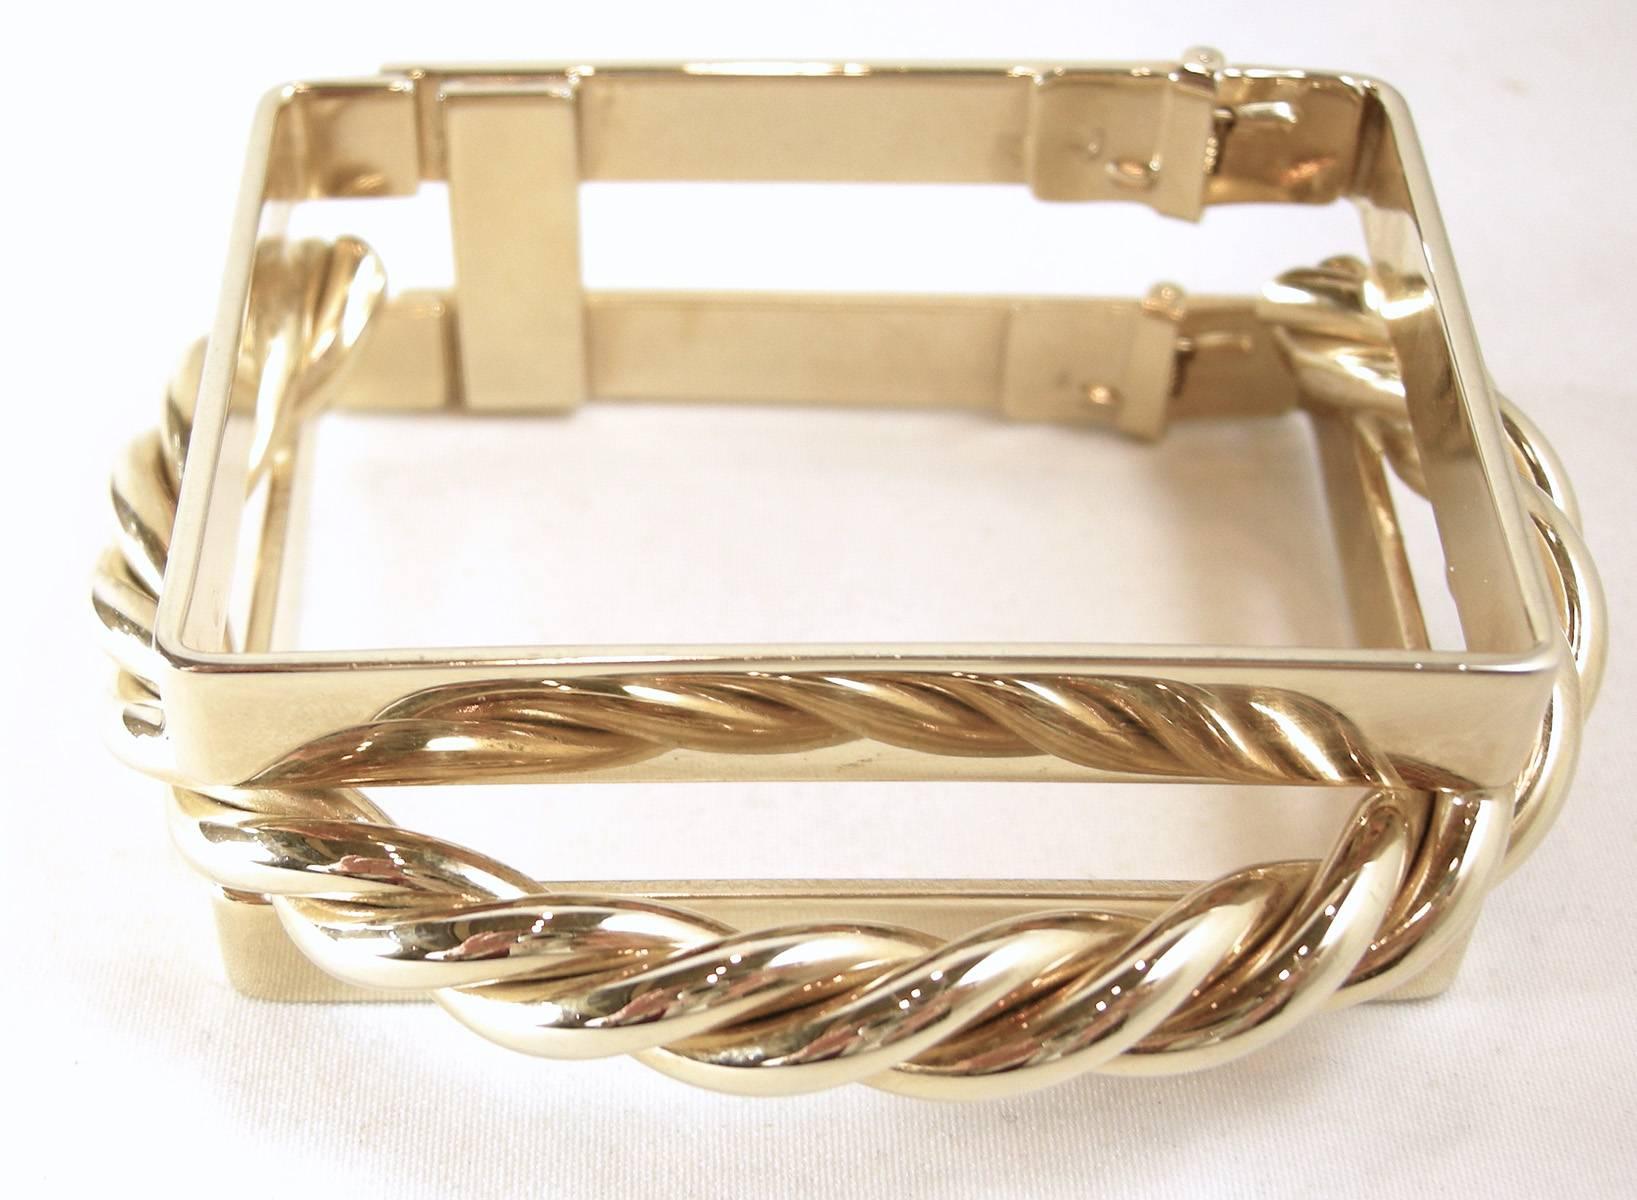 This bracelet has to be a designer piece.  It is so unique and looks like real gold.  It has a square shape with a gold-tone rope between 3/4 of the bracelet.  It has a hinge opening so it’s put onto the wrist like a clamper bracelet. The photograph